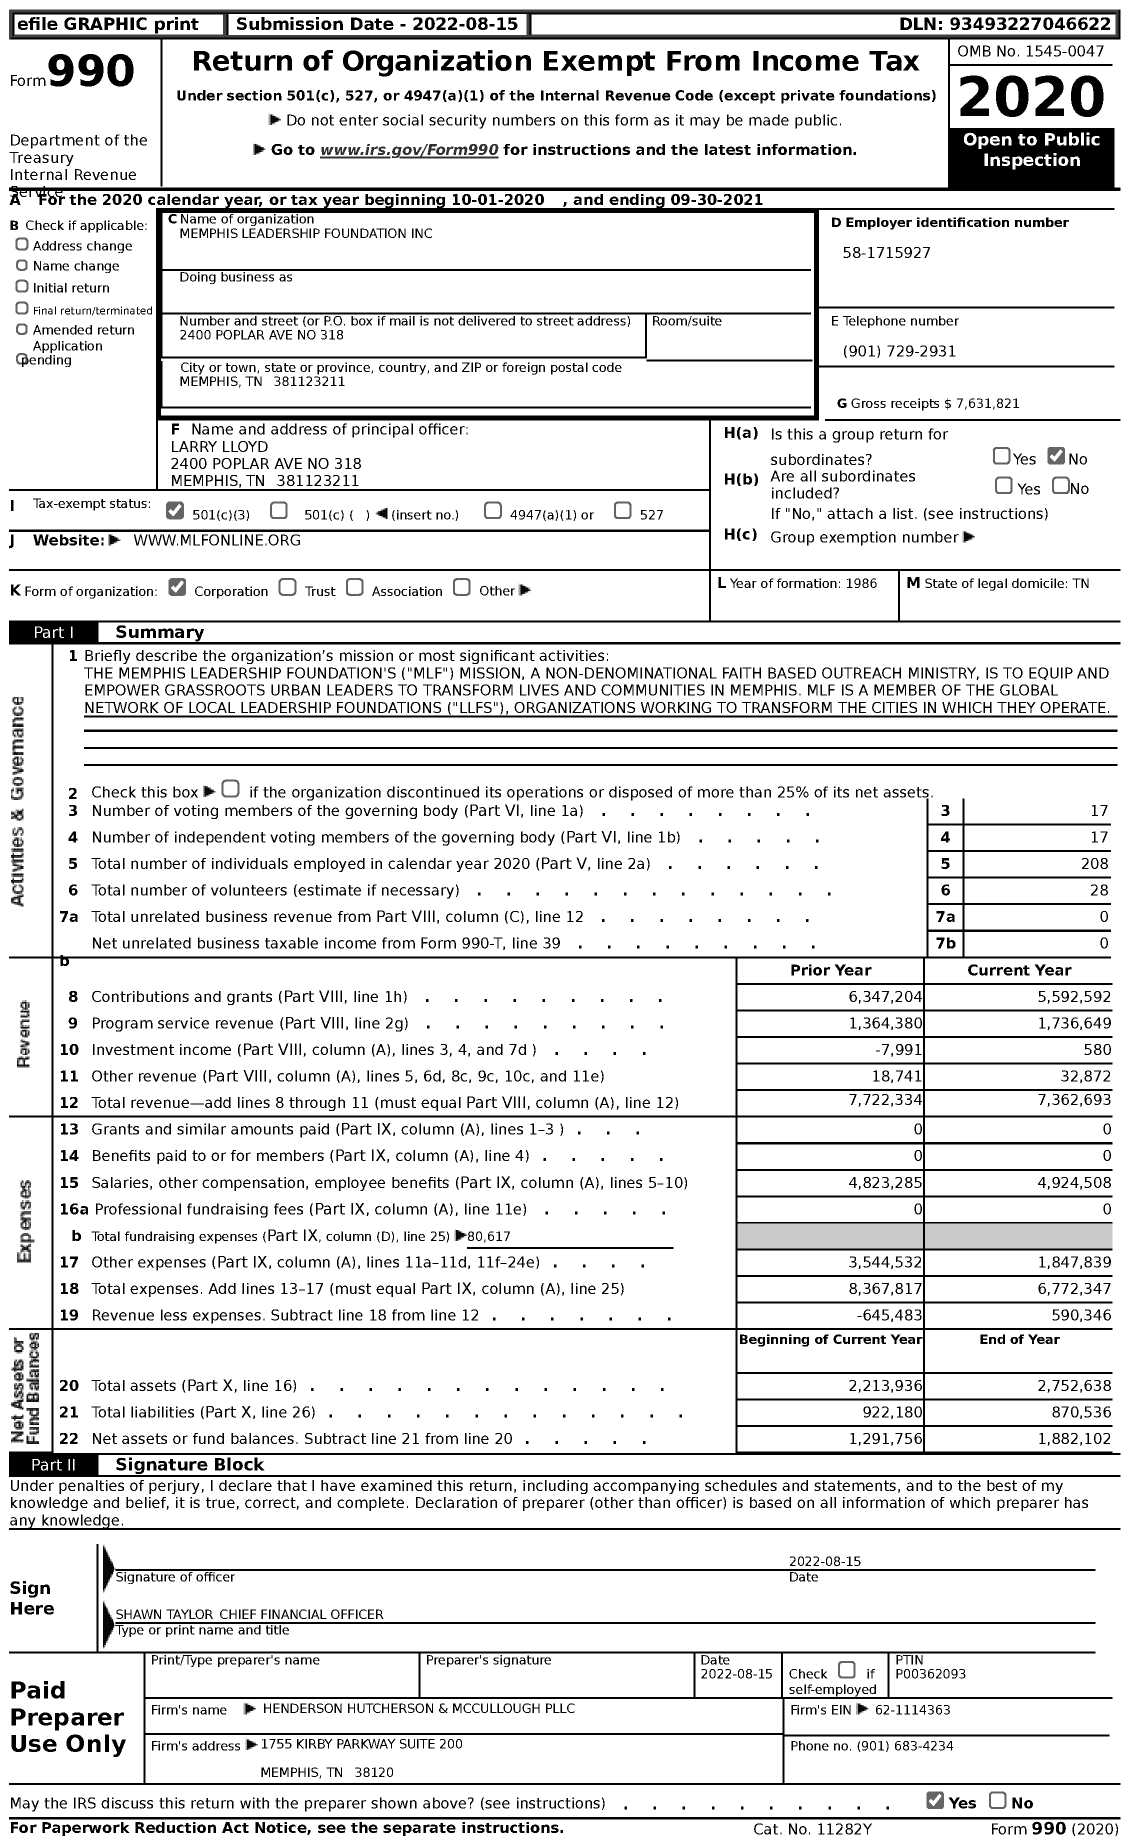 Image of first page of 2020 Form 990 for Memphis Leadership Foundation (MLF)